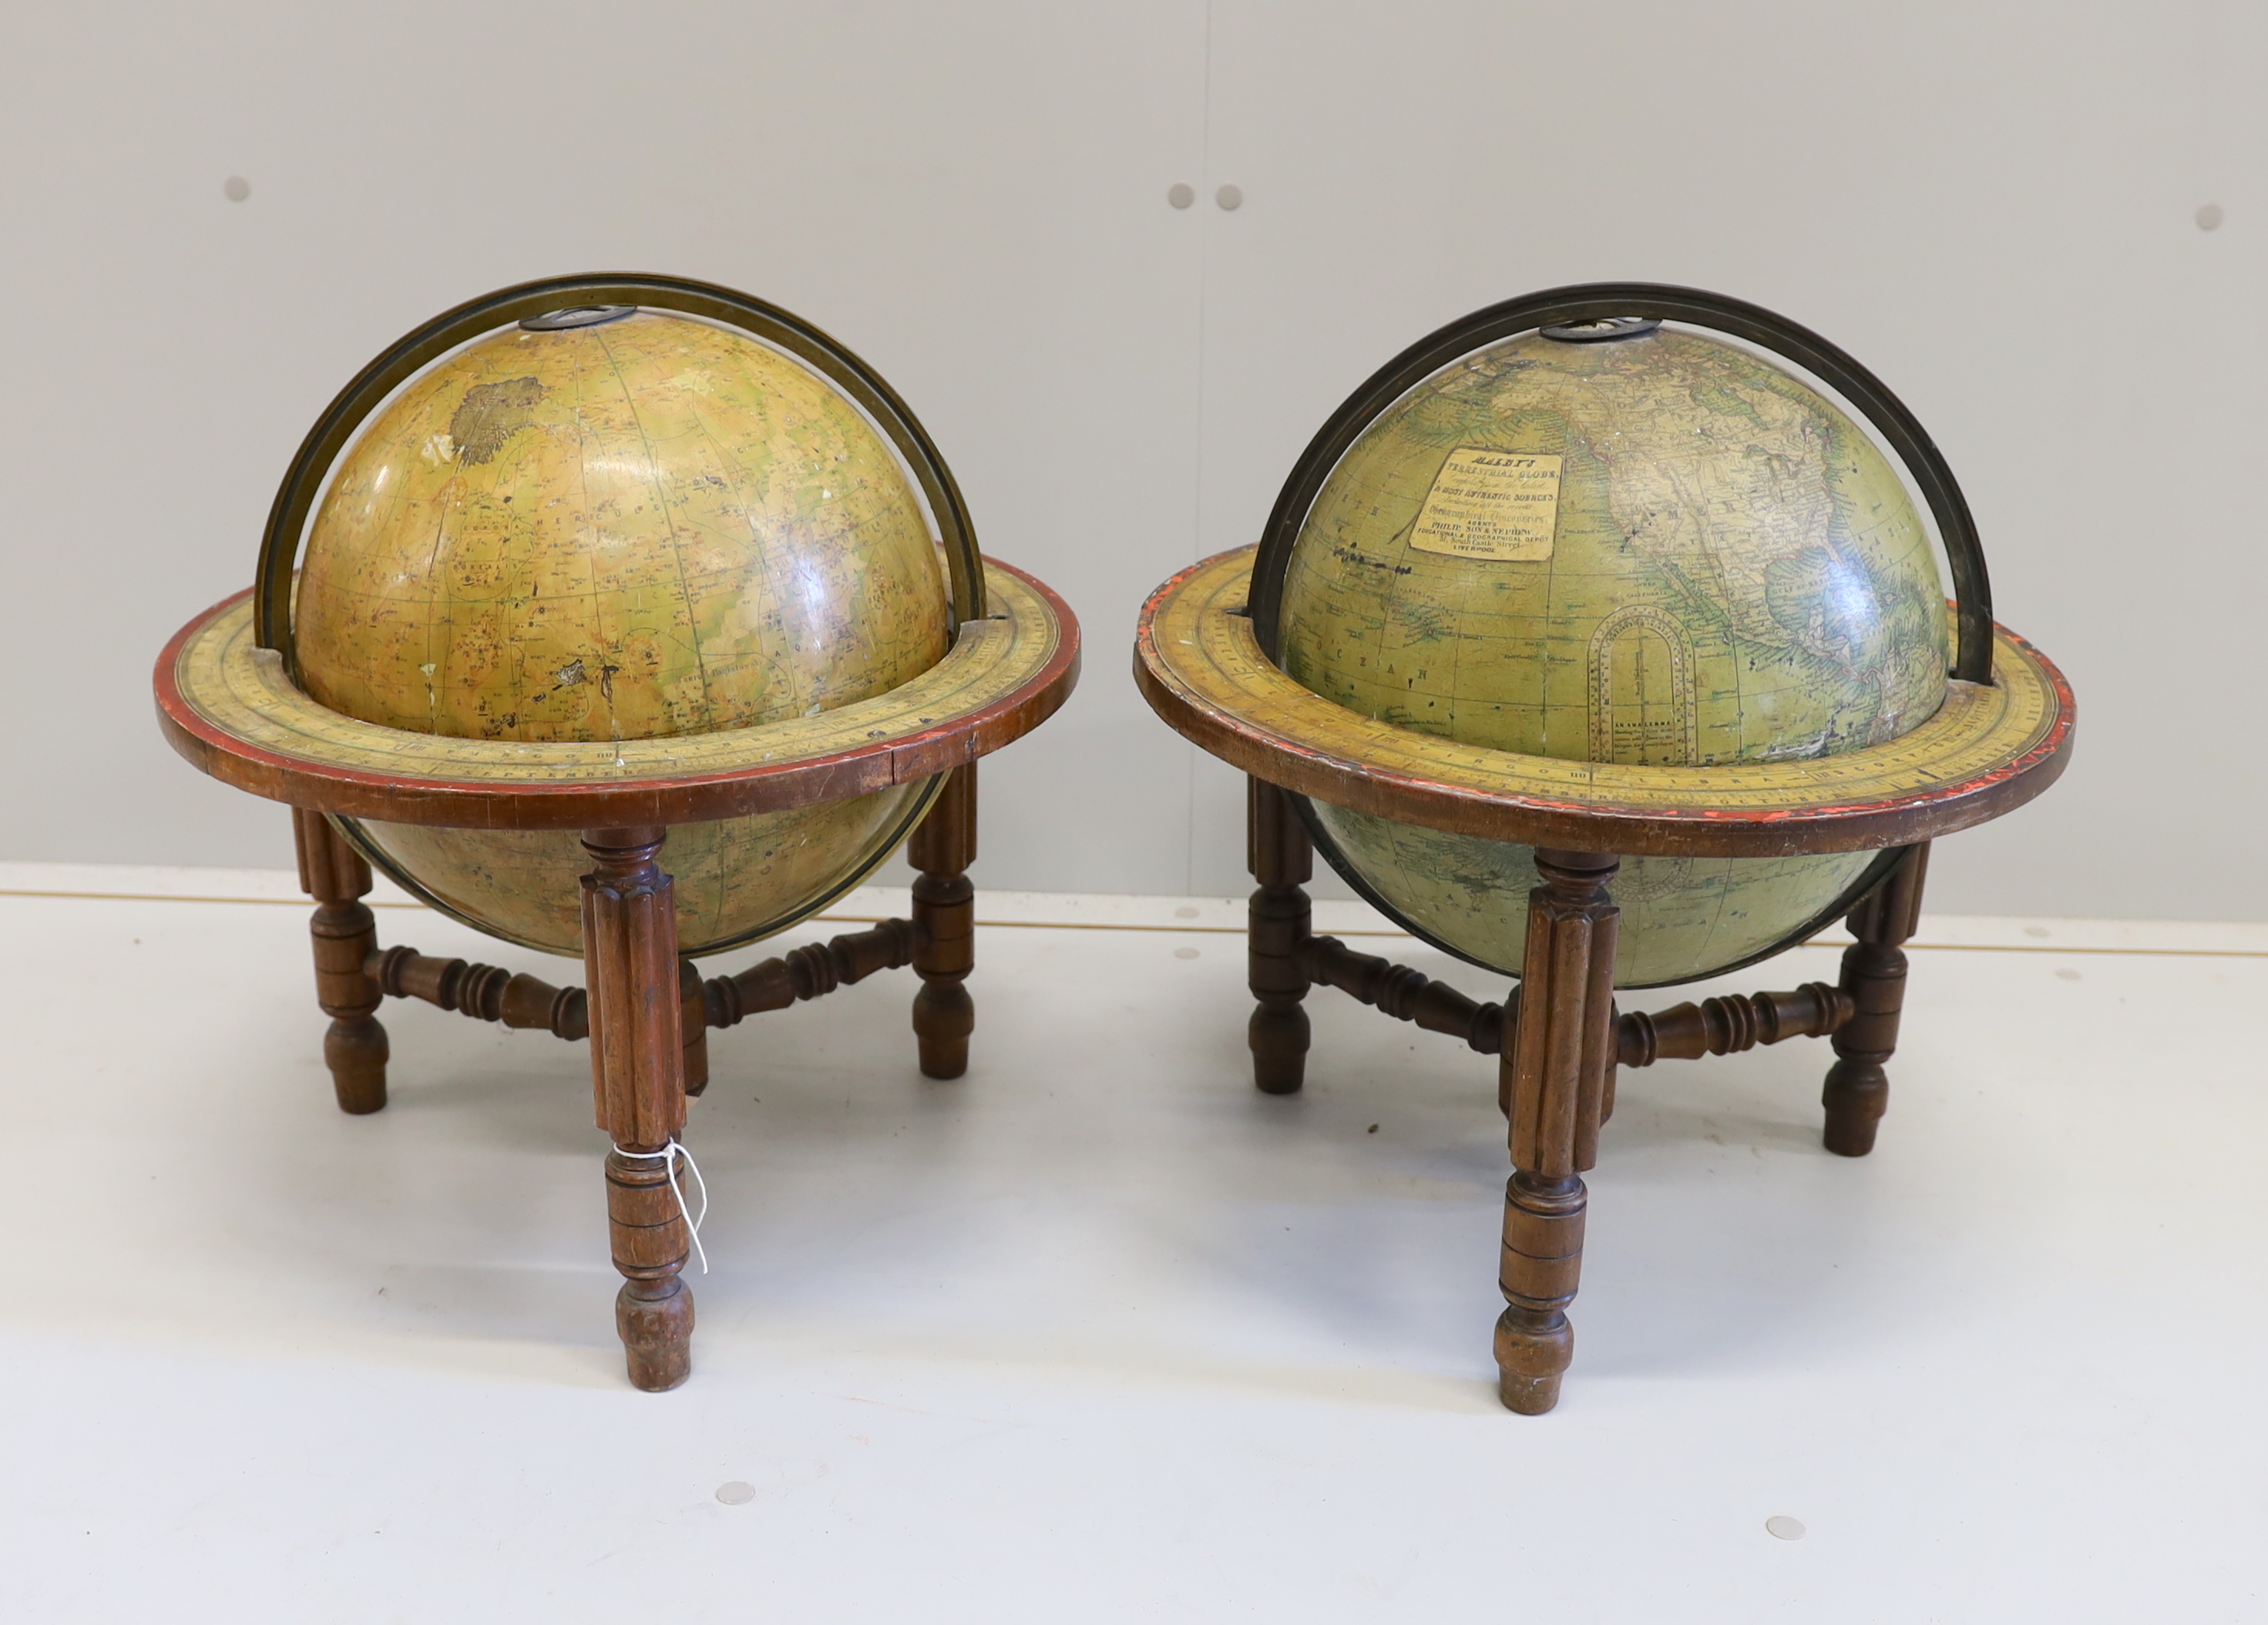 A pair of 19th century 12 inch table top library globes on stands by Malby